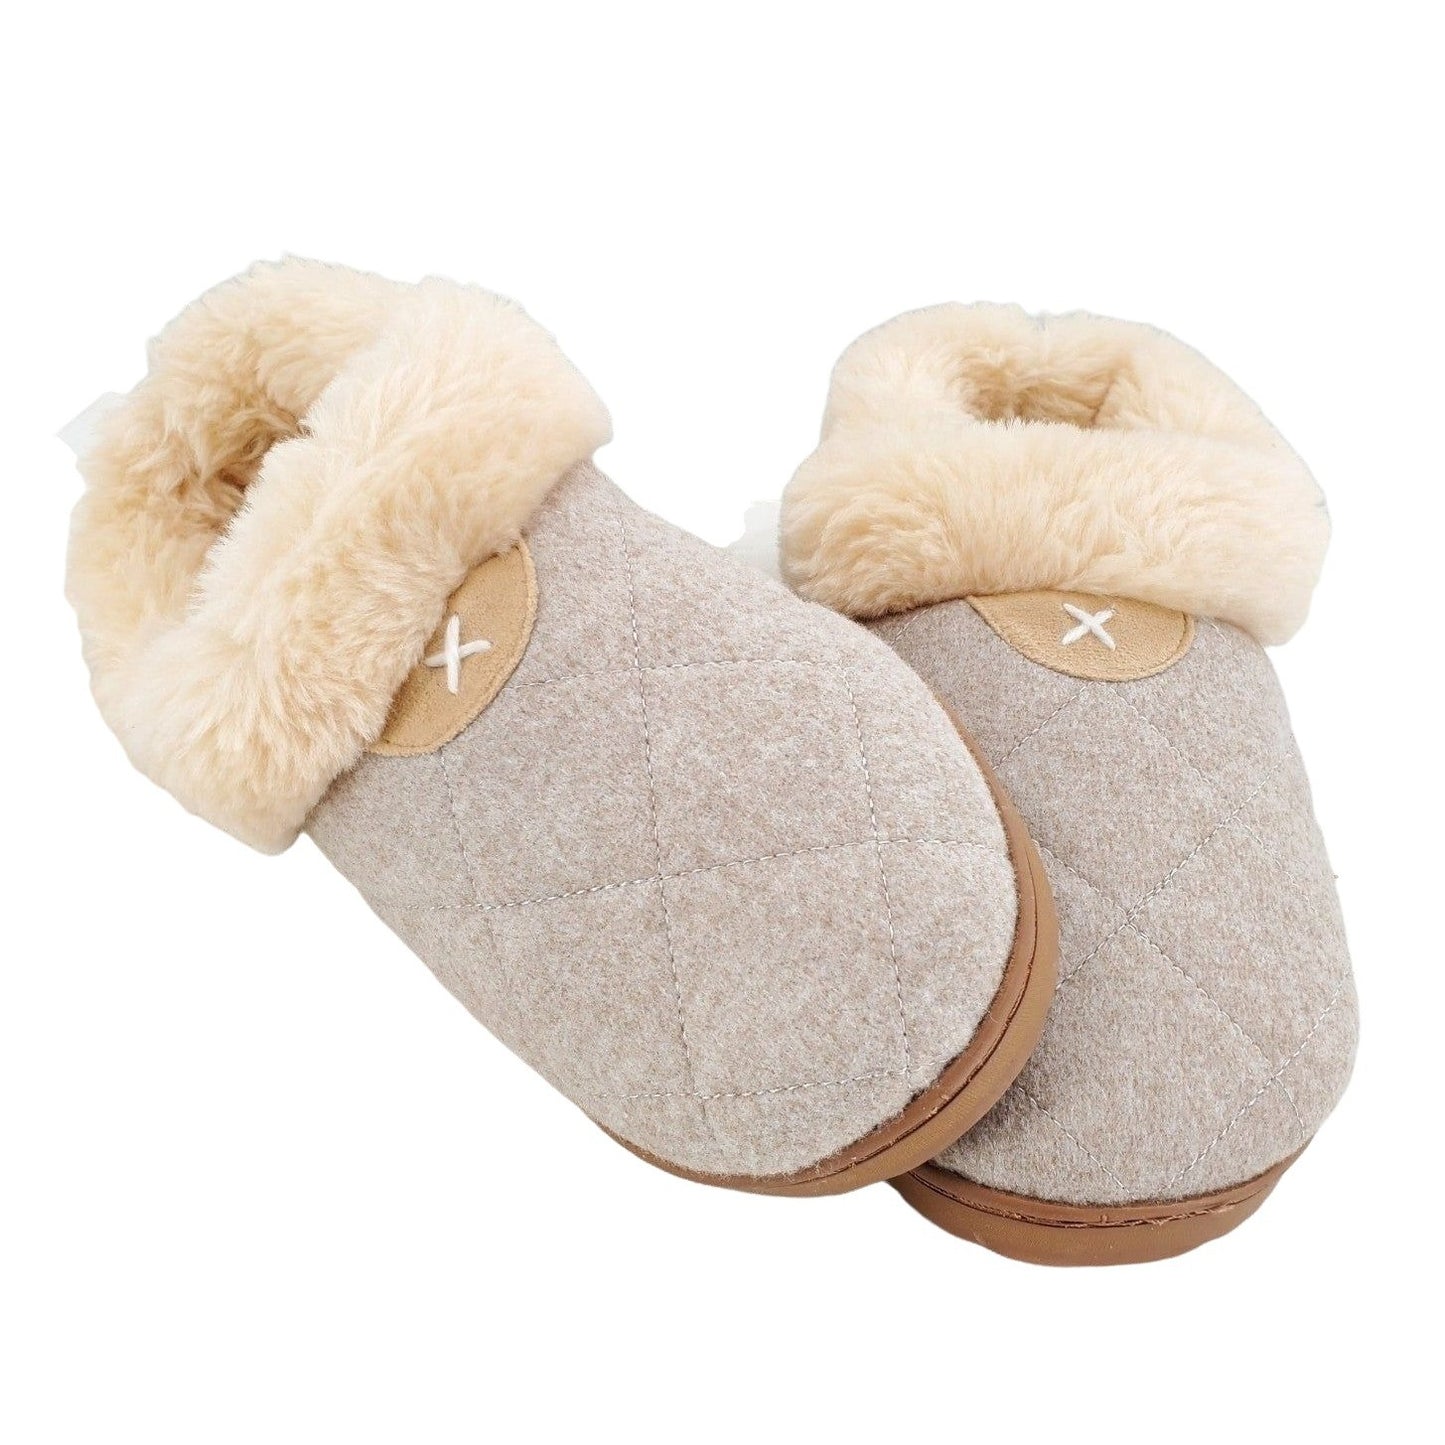 New DEARFOAMS Slippers Woman's House Shoes Clogs indoor outdoor Wool